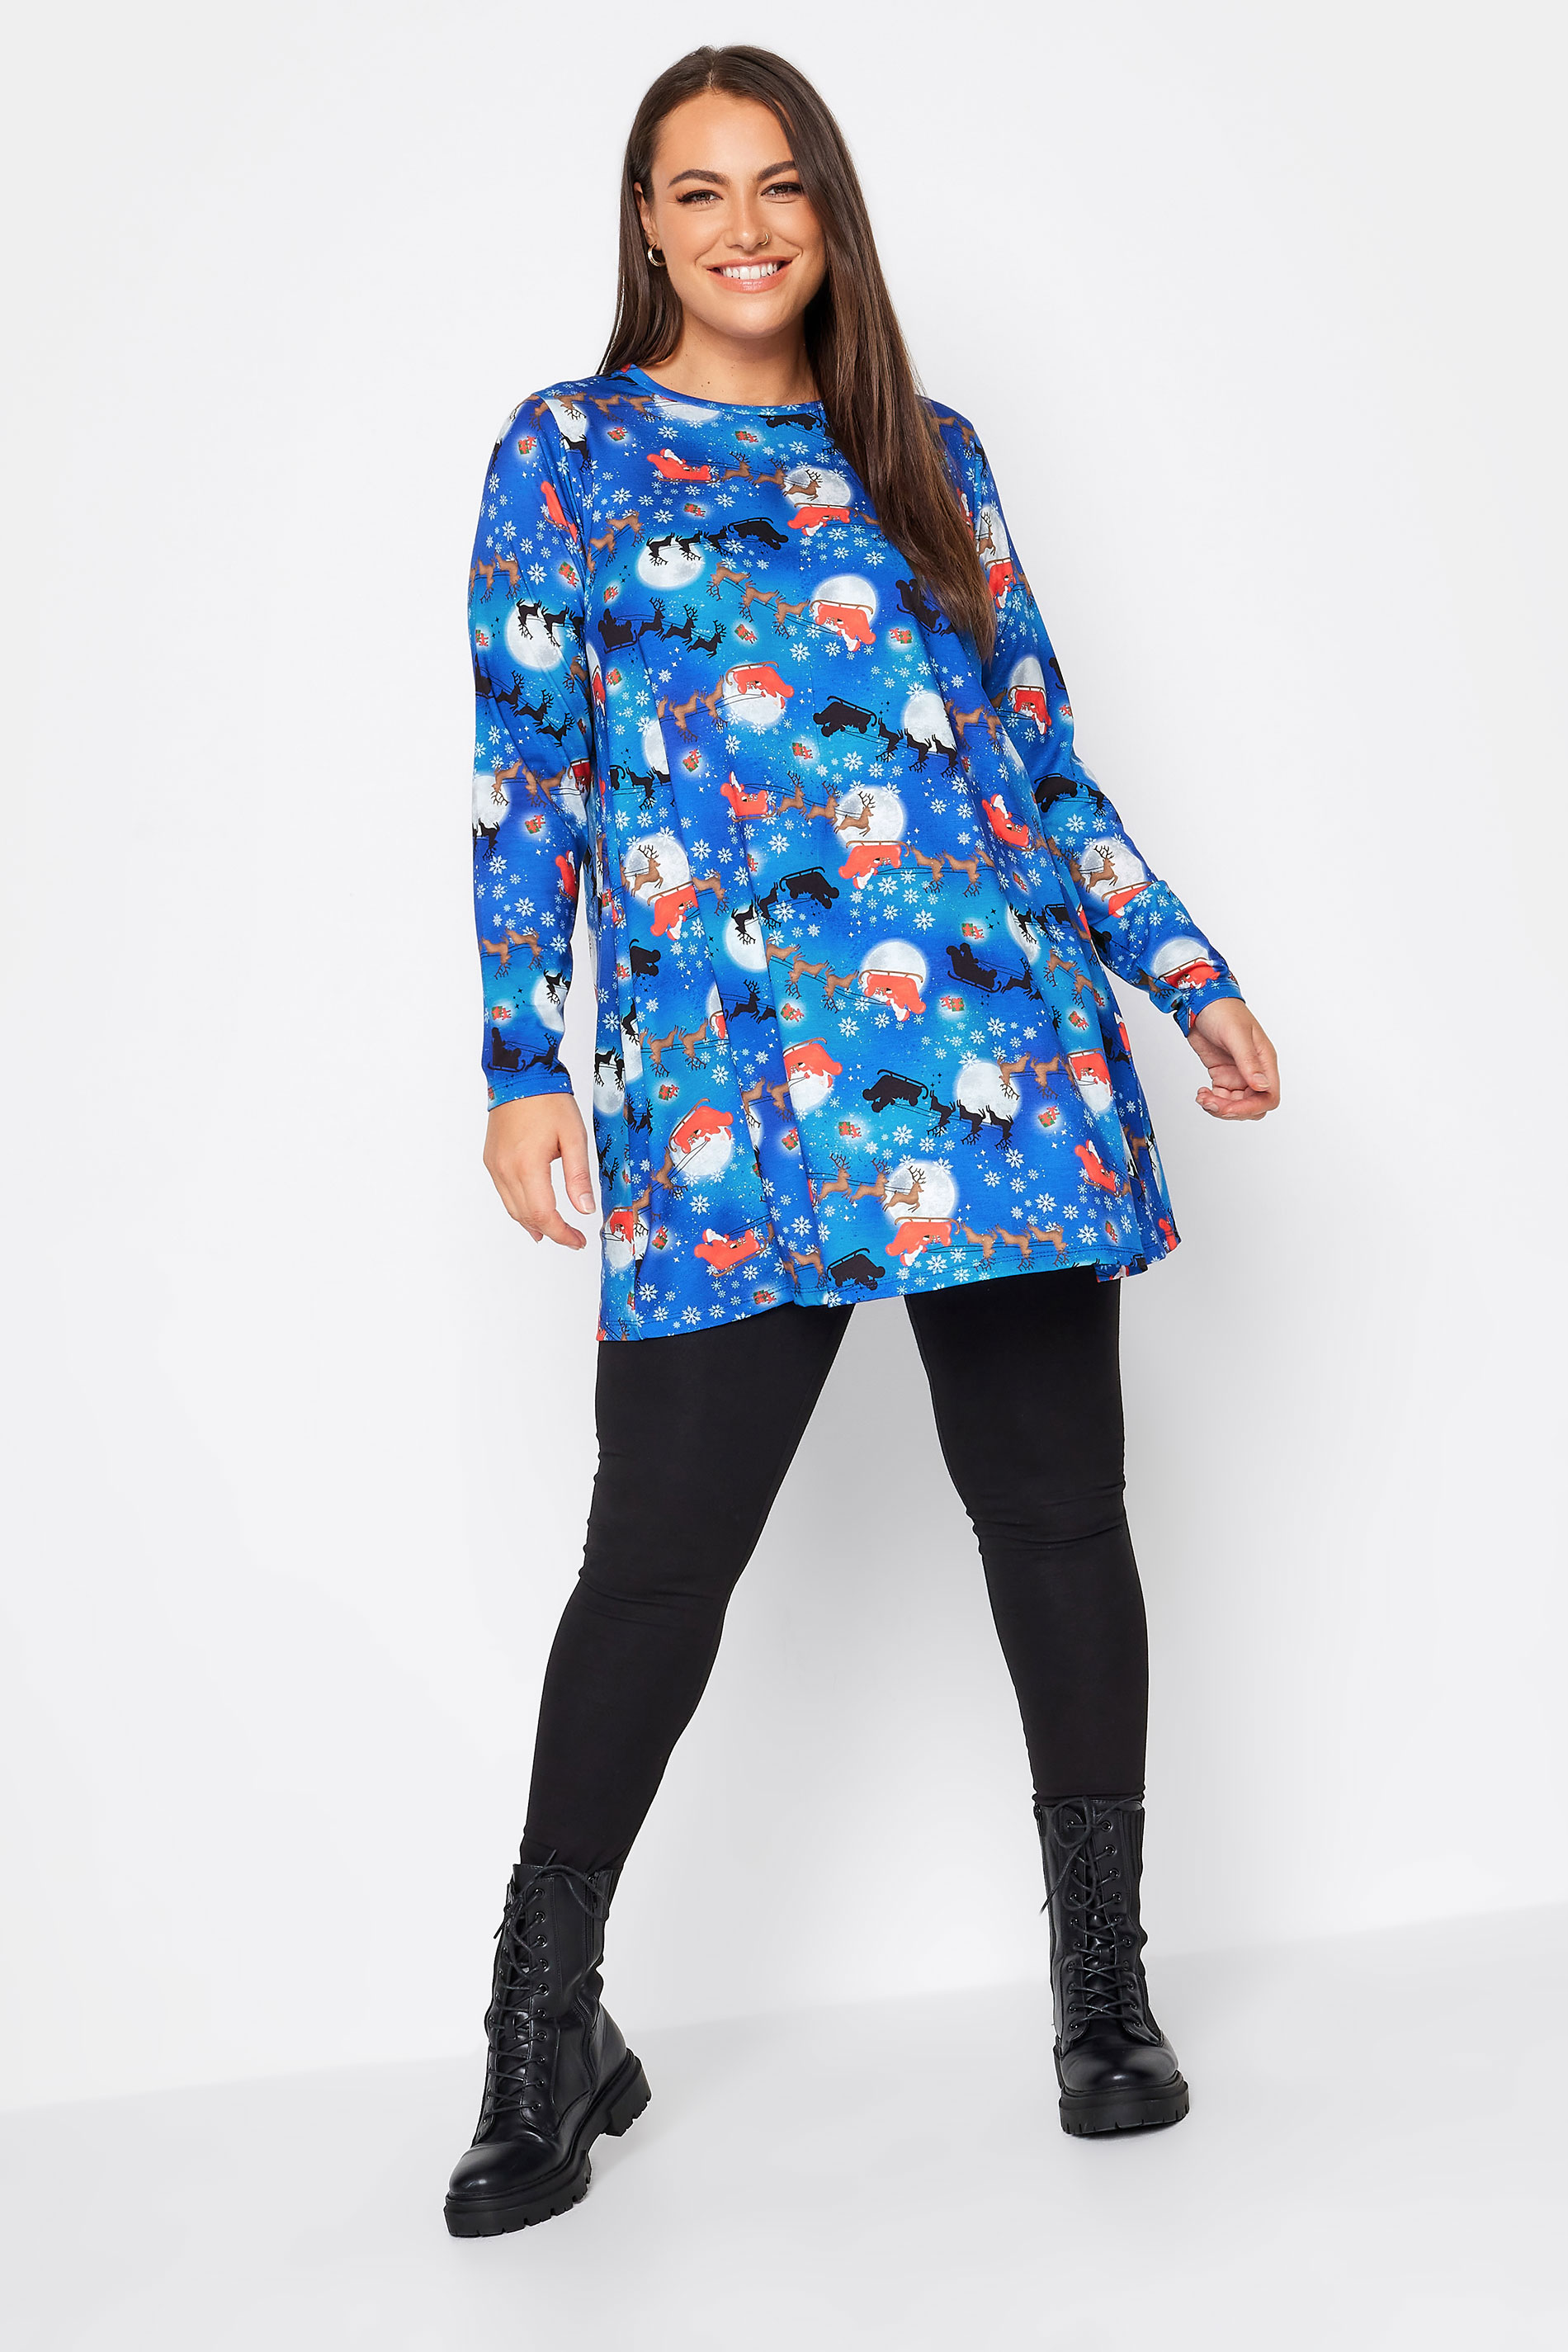 YOURS Plus Size Blue Christmas Night Print Tunic Top | Yours Clothing 2